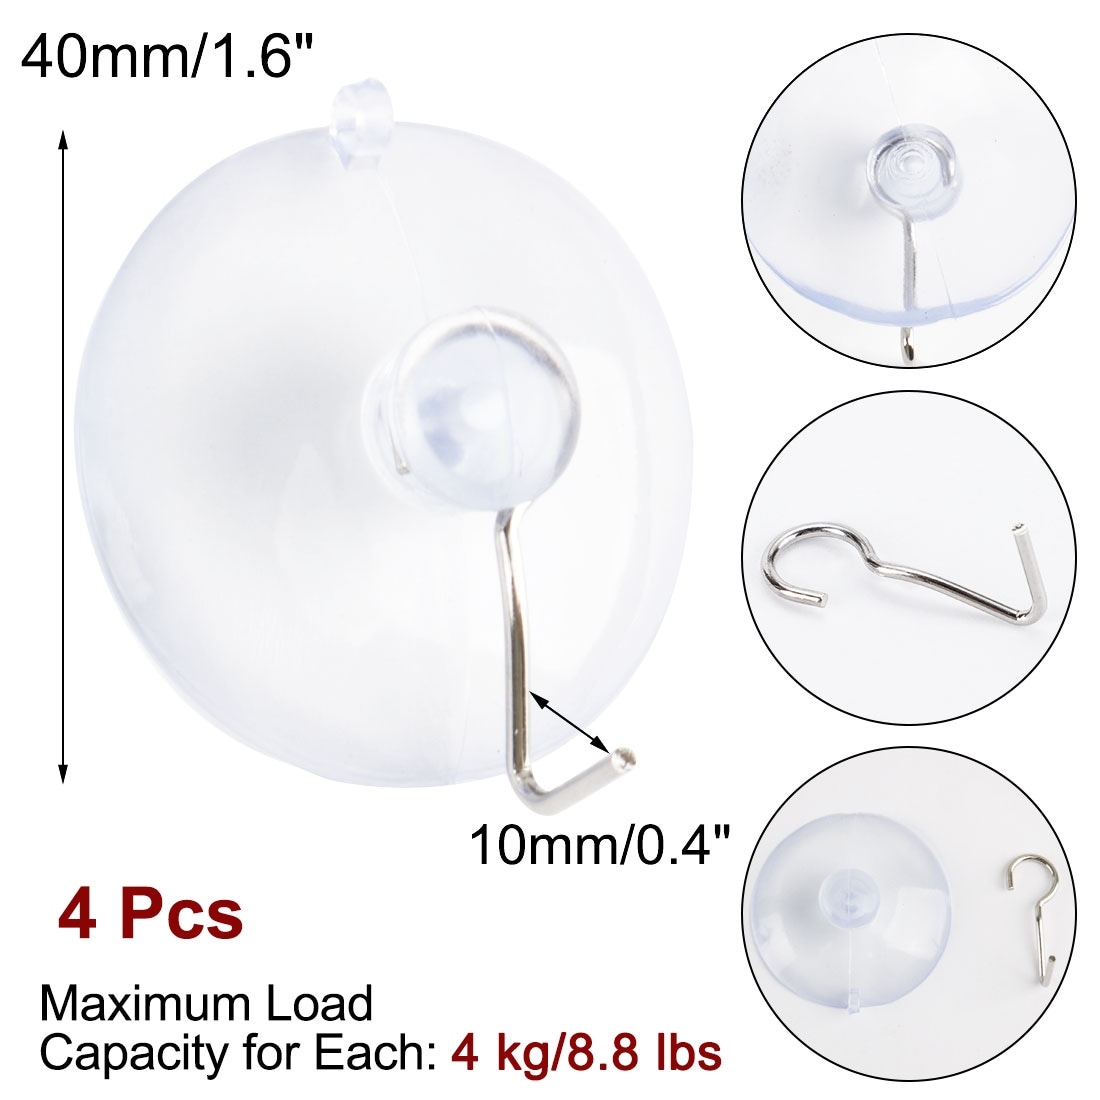 https://ak1.ostkcdn.com/images/products/is/images/direct/931ced26fe647acd4a2fdae9d32eee5e5f82844c/Suction-Cup-Hook-1.6%22-Removable-Metal-Hook-Wall-Vacuum-Hooks-Hangers.jpg